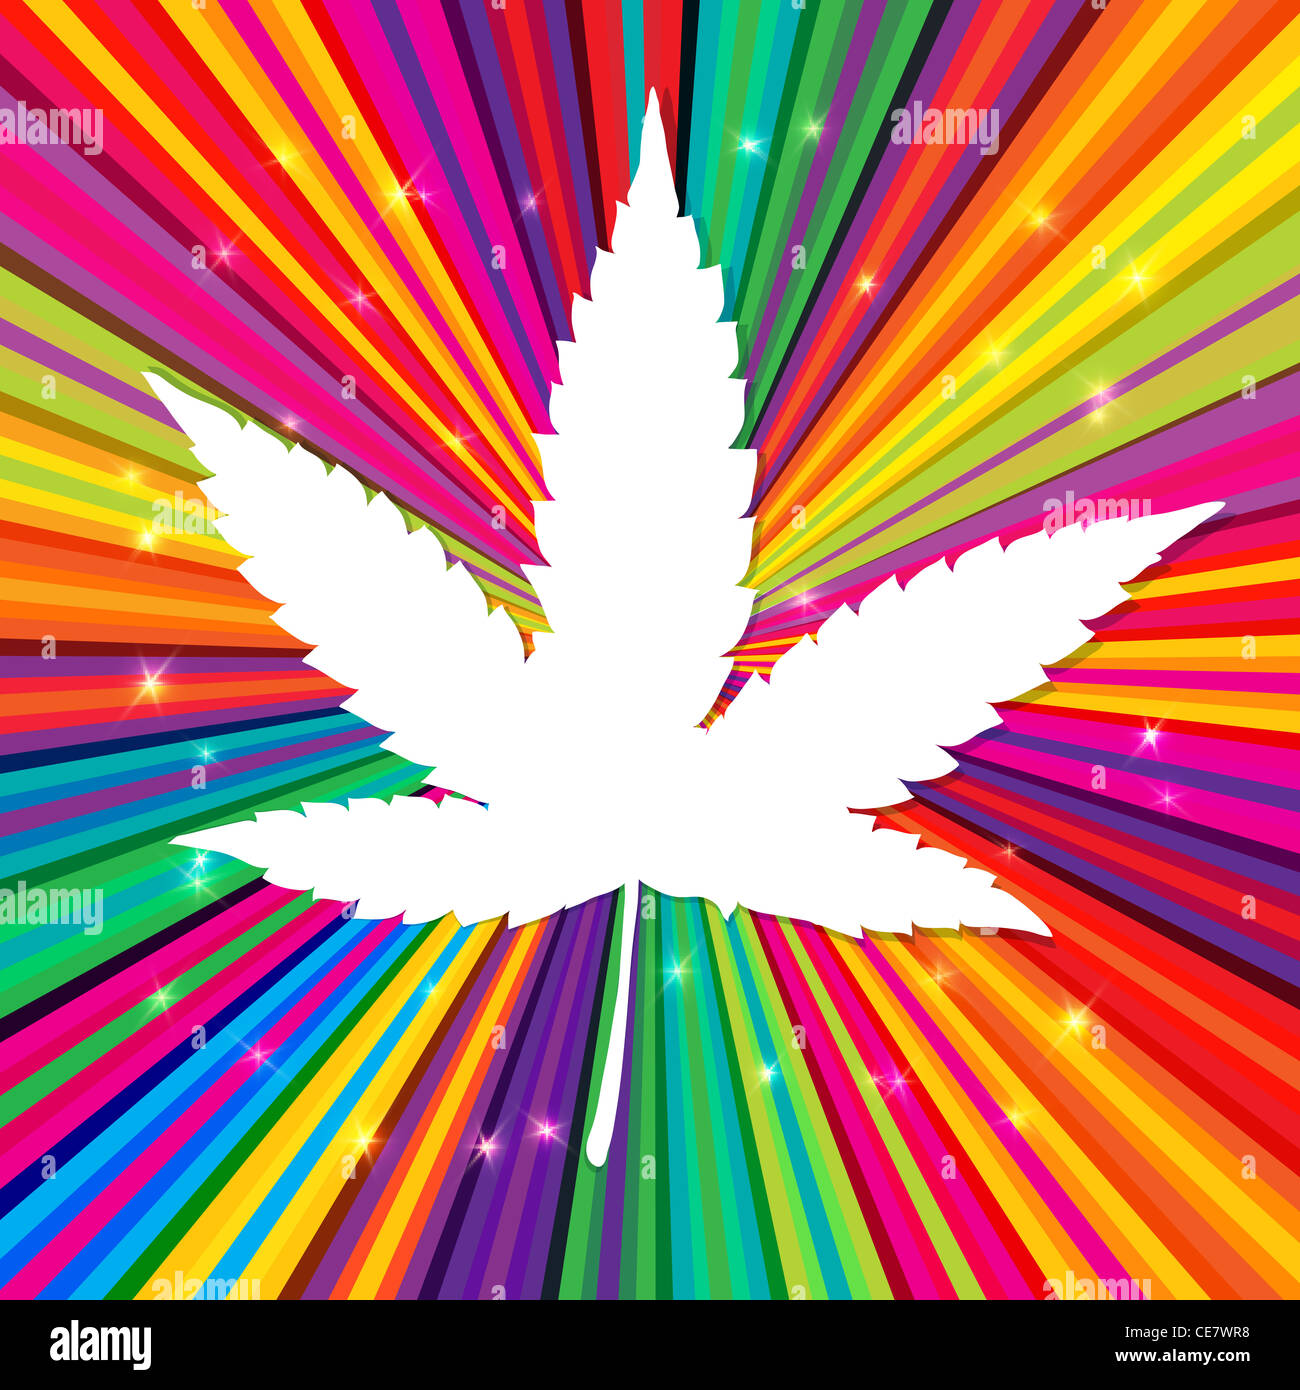 Cannabis leaf on abstract psychedelic background Stock Photo